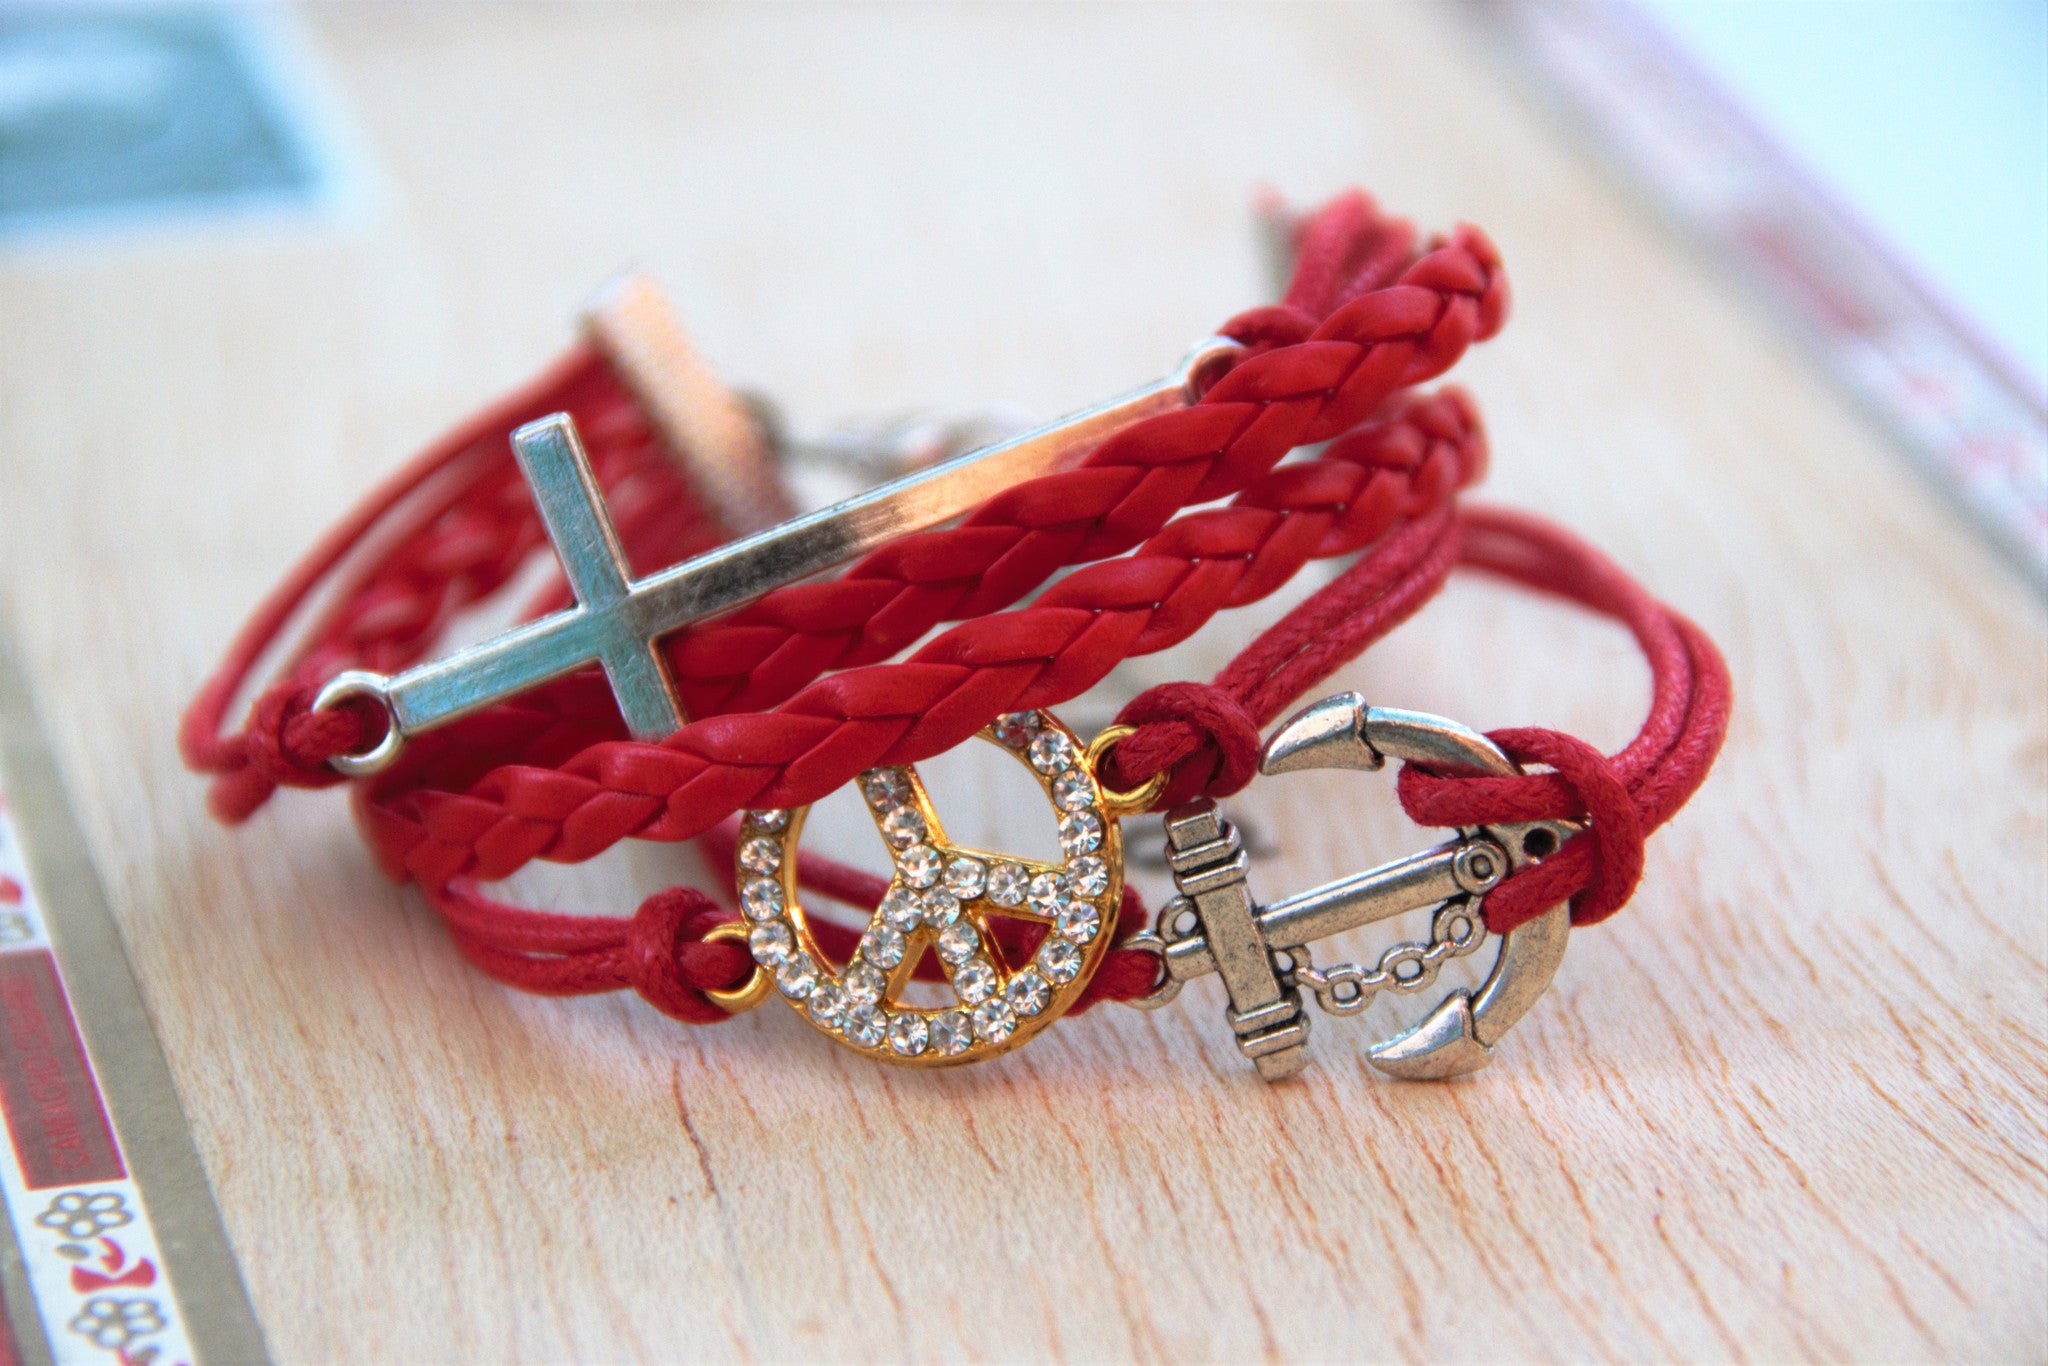 Ladies Fashion Bracelet with Red Cord with Cross Anchor and Peac